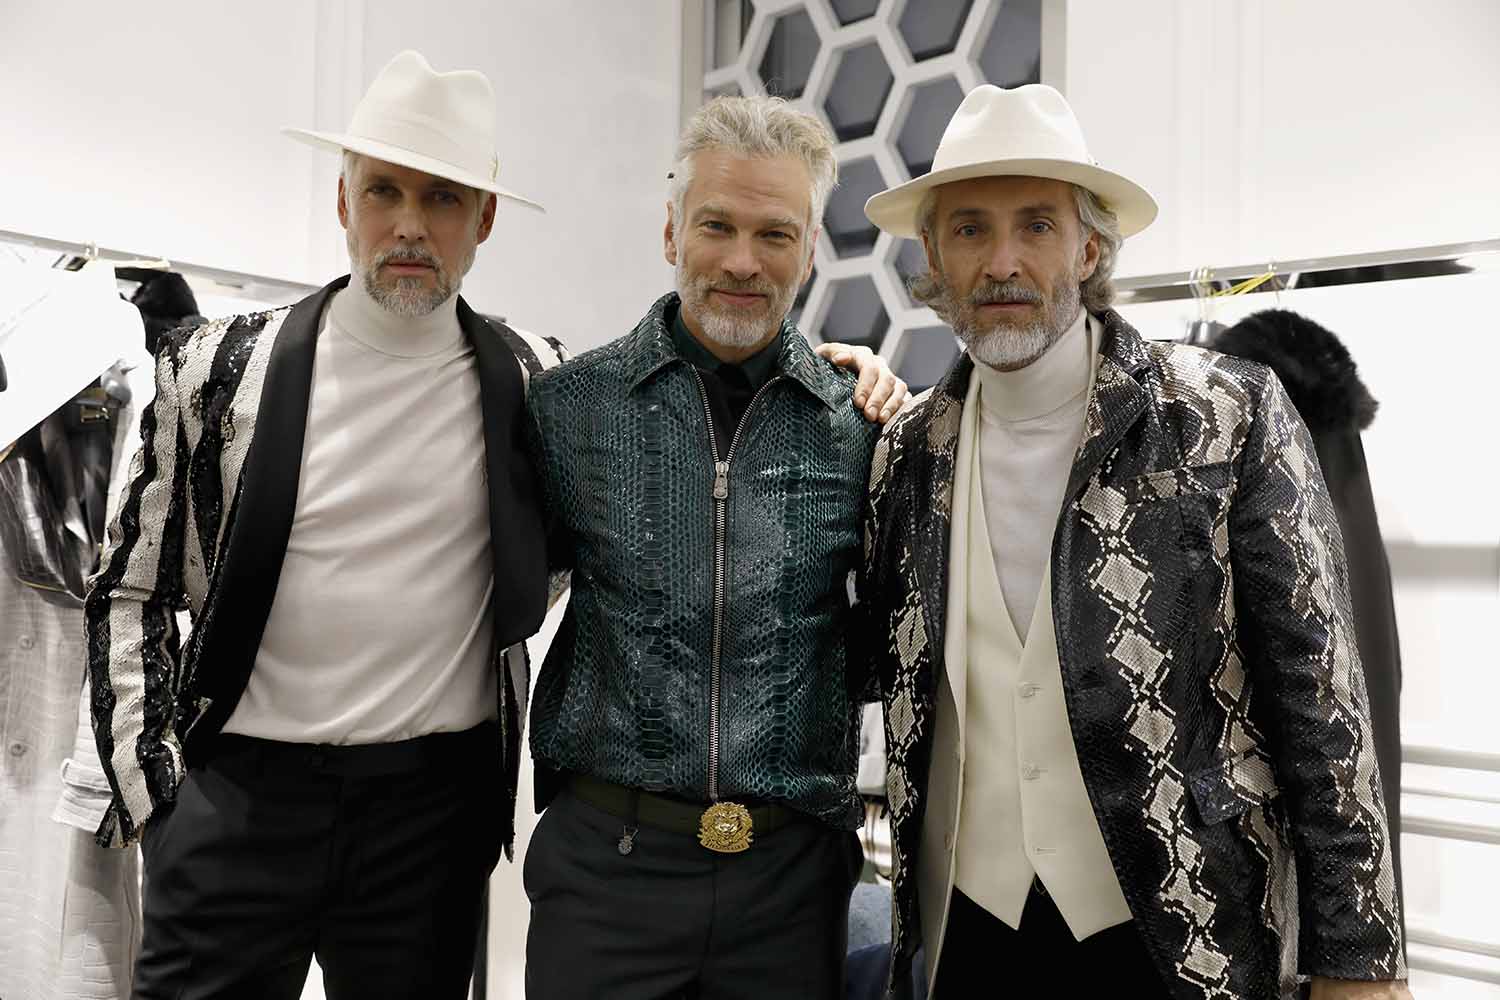 Billionaire Fall 2018 by Philipp Plein: Separating the Men from the Boys